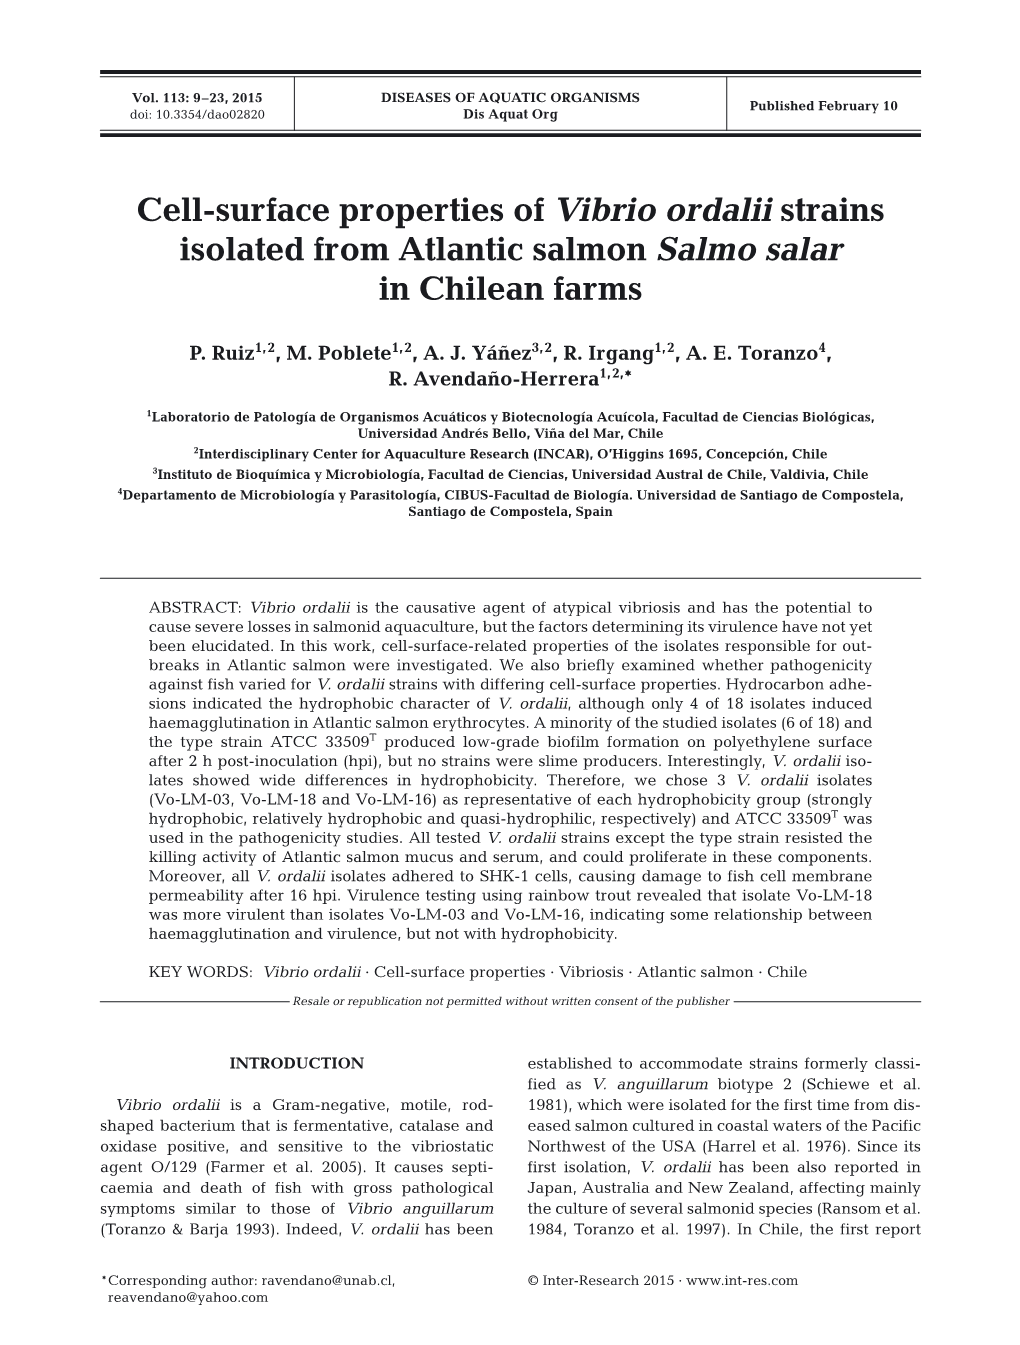 Cell-Surface Properties of Vibrio Ordalii Strains Isolated from Atlantic Salmon Salmo Salar in Chilean Farms